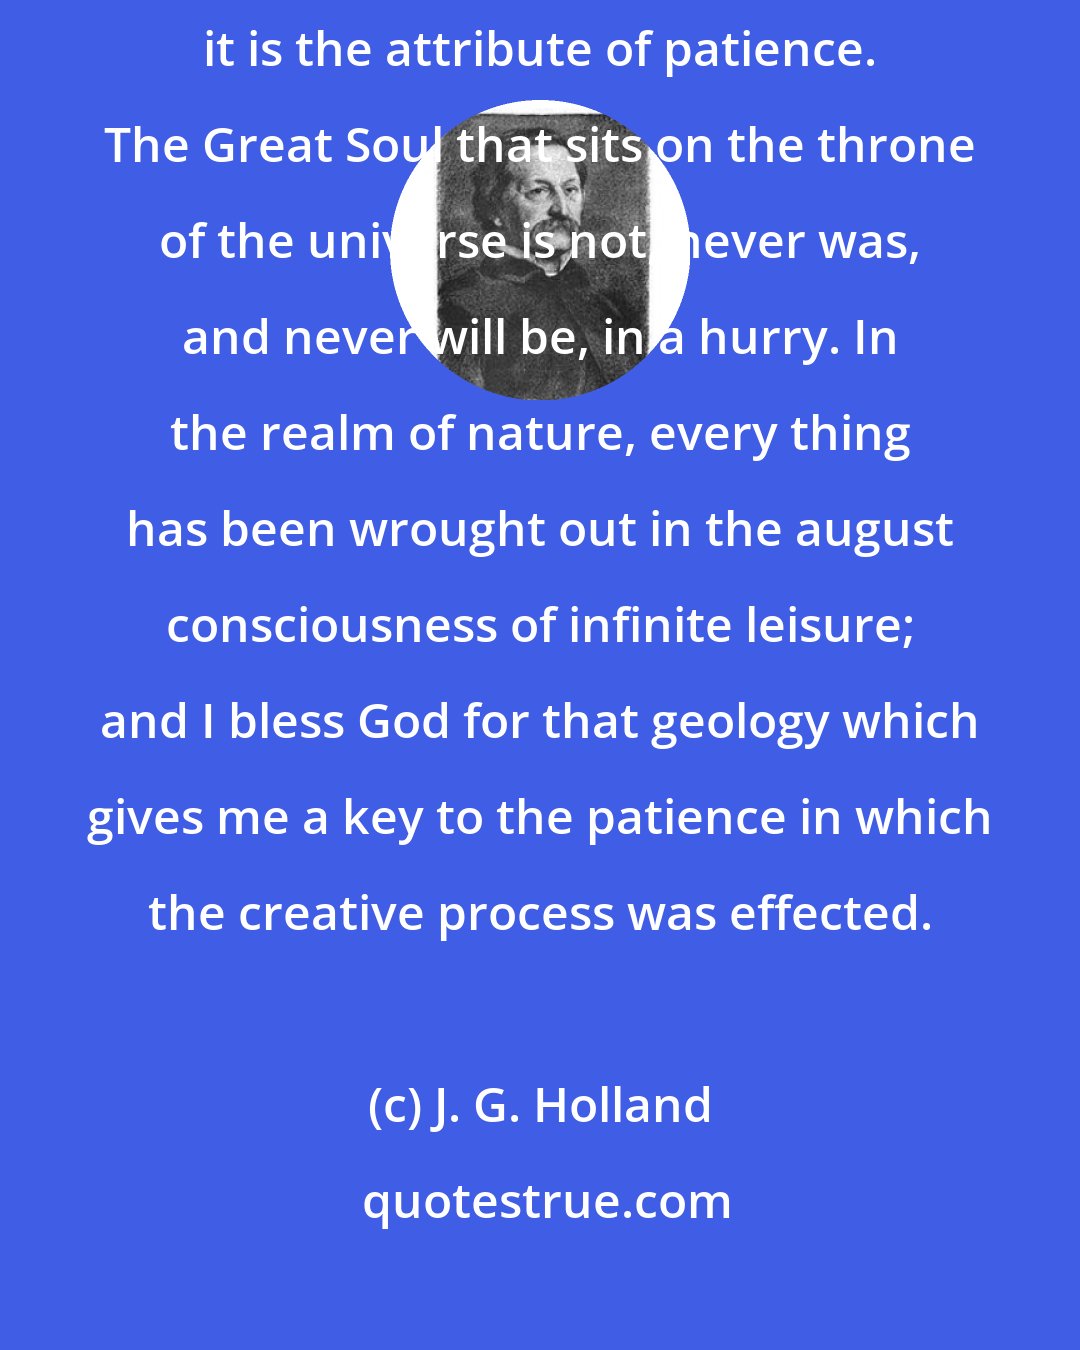 J. G. Holland: If there be one attribute of the Deity which astonishes me more than another, it is the attribute of patience. The Great Soul that sits on the throne of the universe is not, never was, and never will be, in a hurry. In the realm of nature, every thing has been wrought out in the august consciousness of infinite leisure; and I bless God for that geology which gives me a key to the patience in which the creative process was effected.